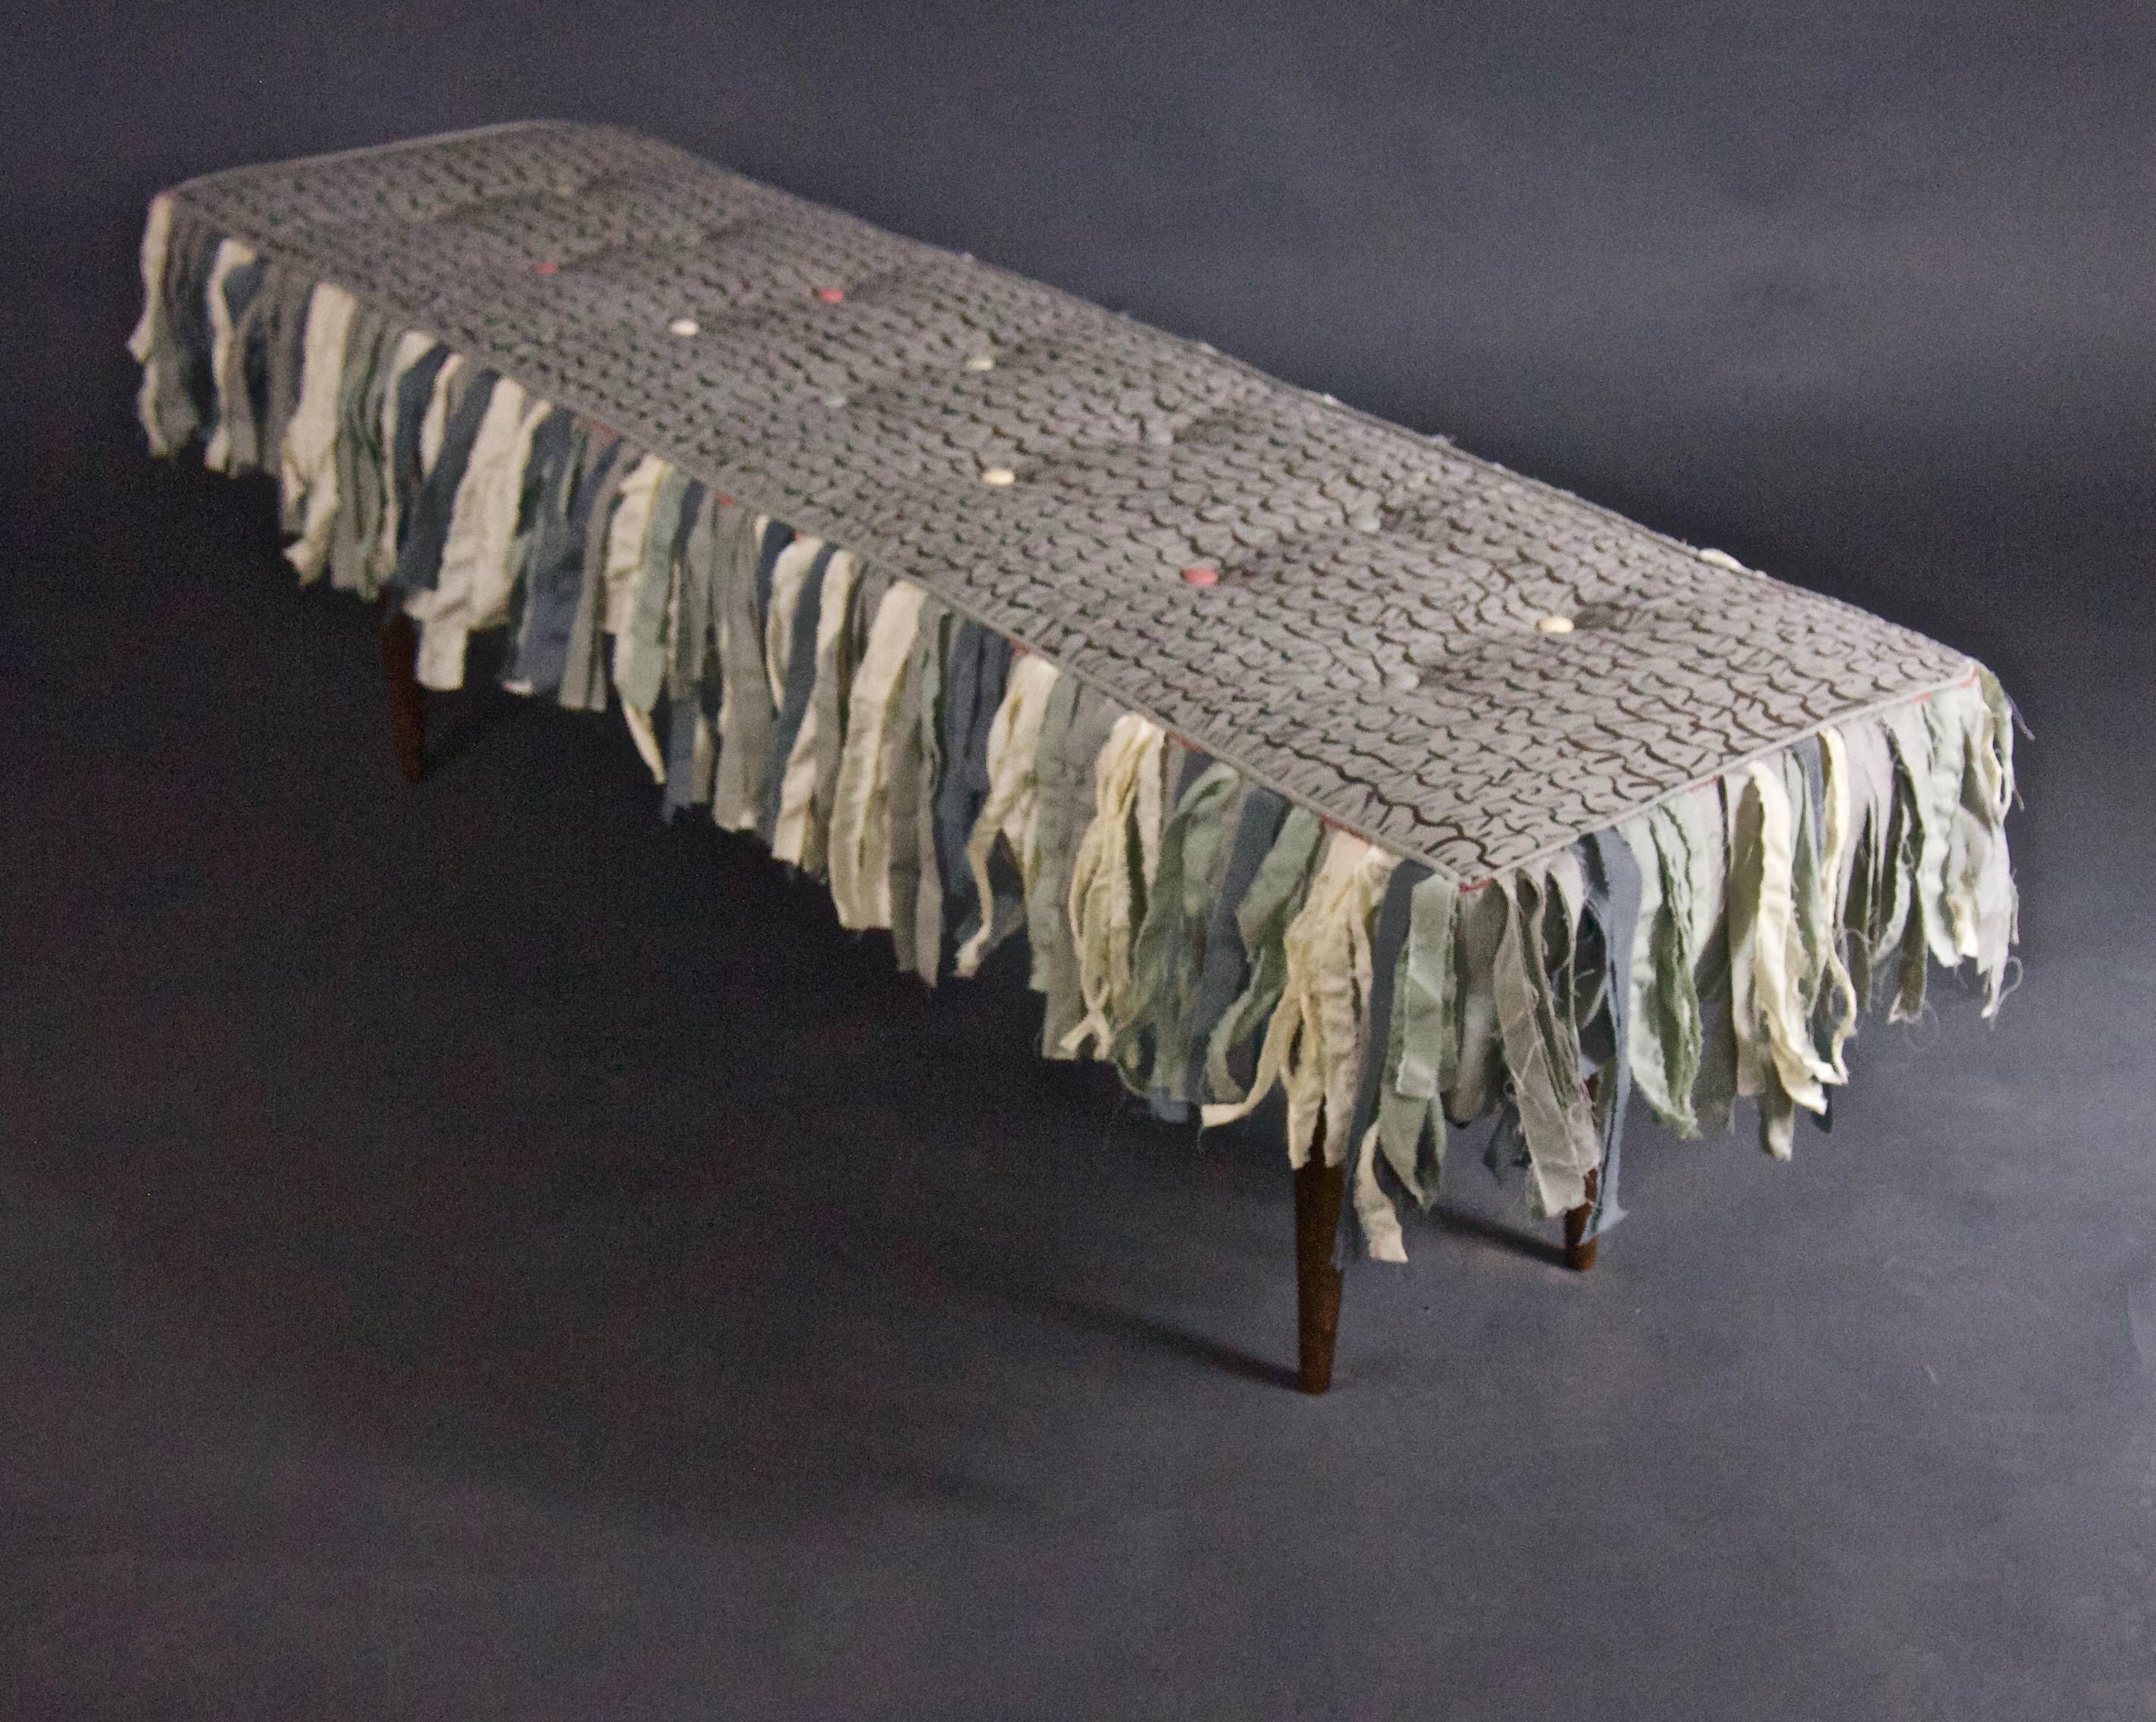 Modern Handmade Bench with Hand-Painted Textile and Handmade Cotton Fringe